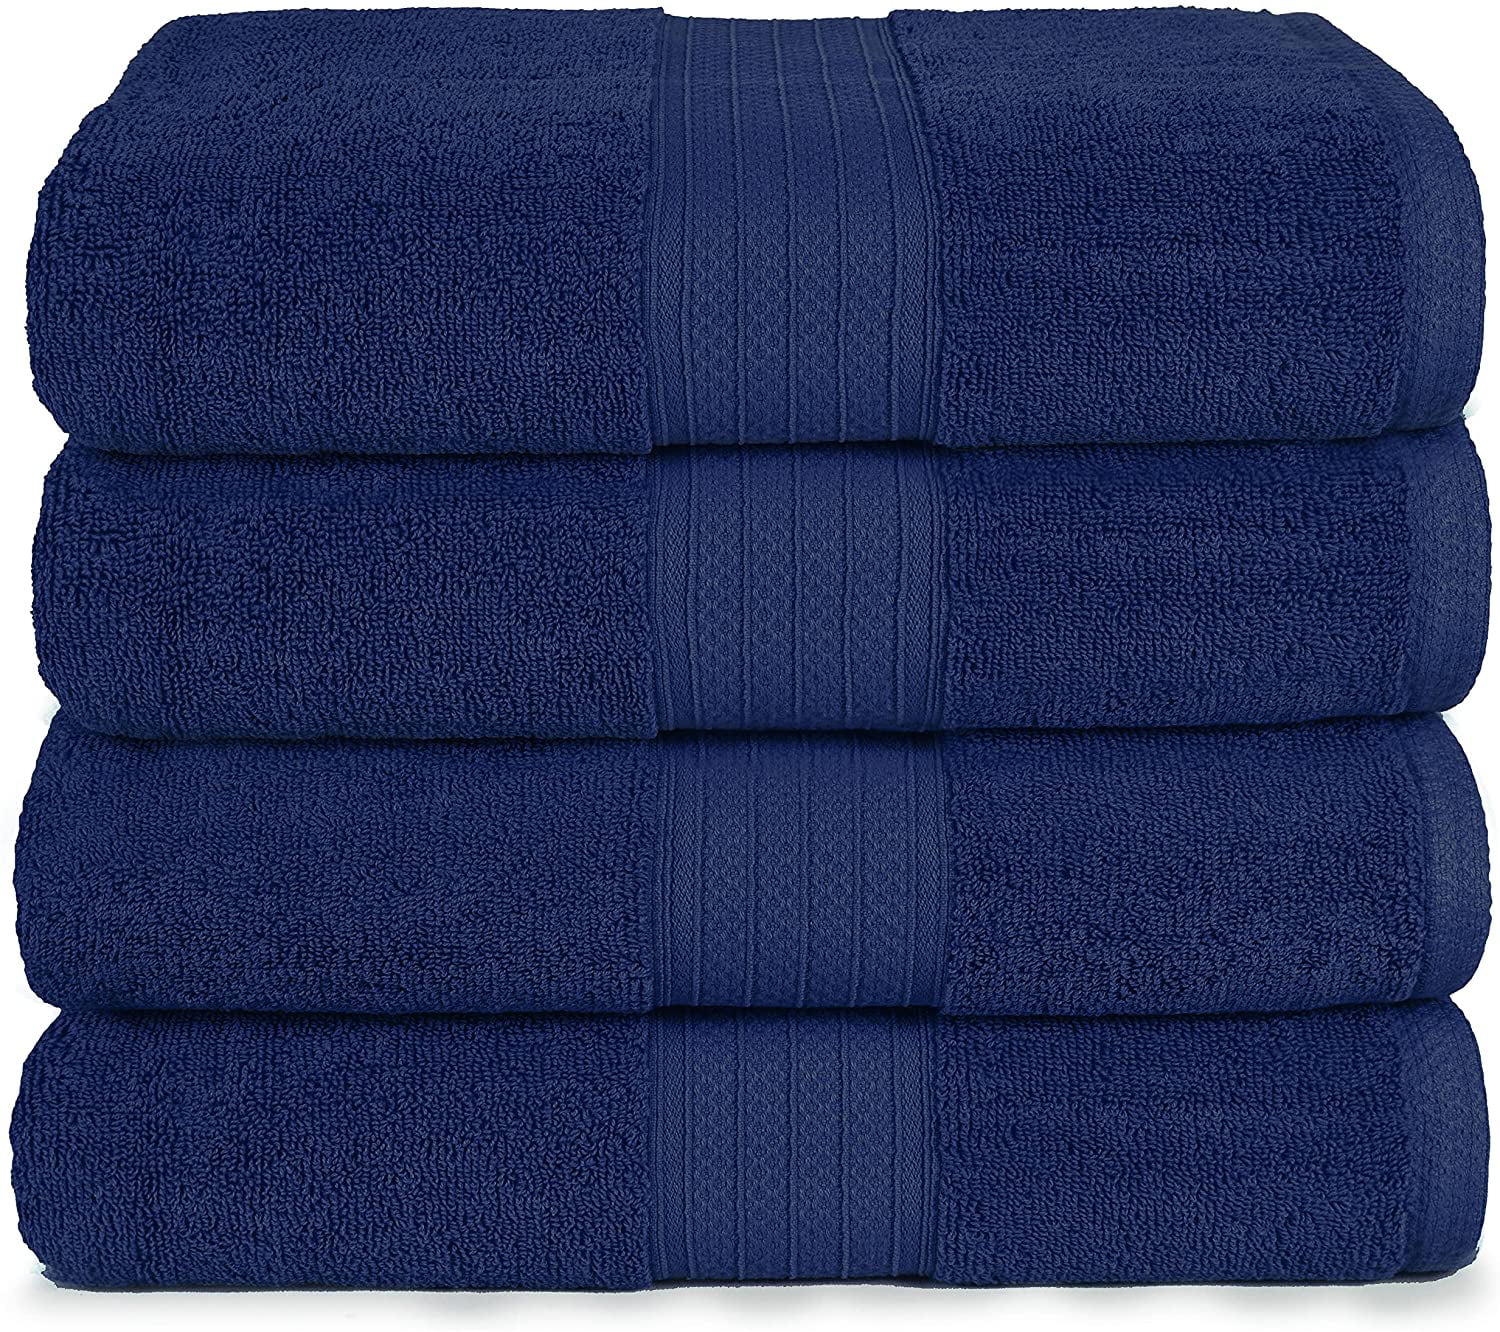 Details about   High Quality Egyptian Cotton 700GSM Super Soft Towels Bath Sheets Extra Thick 